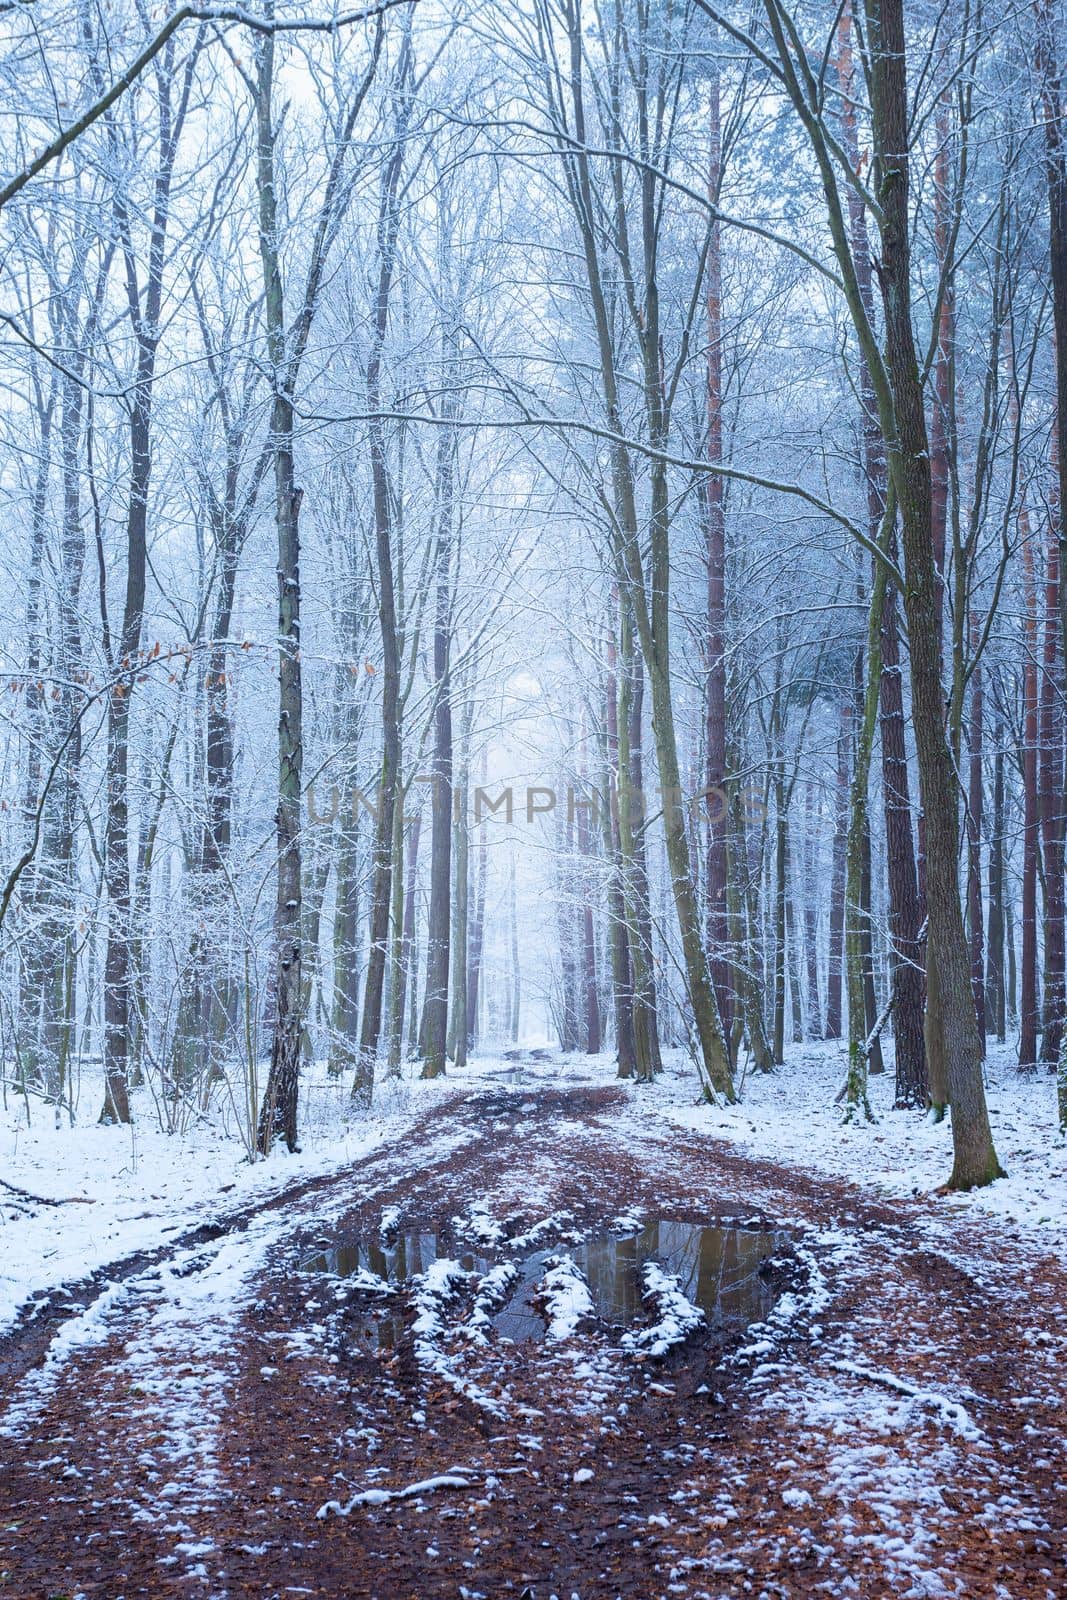 Muddy road alley in winter snow-covered forest by darekb22